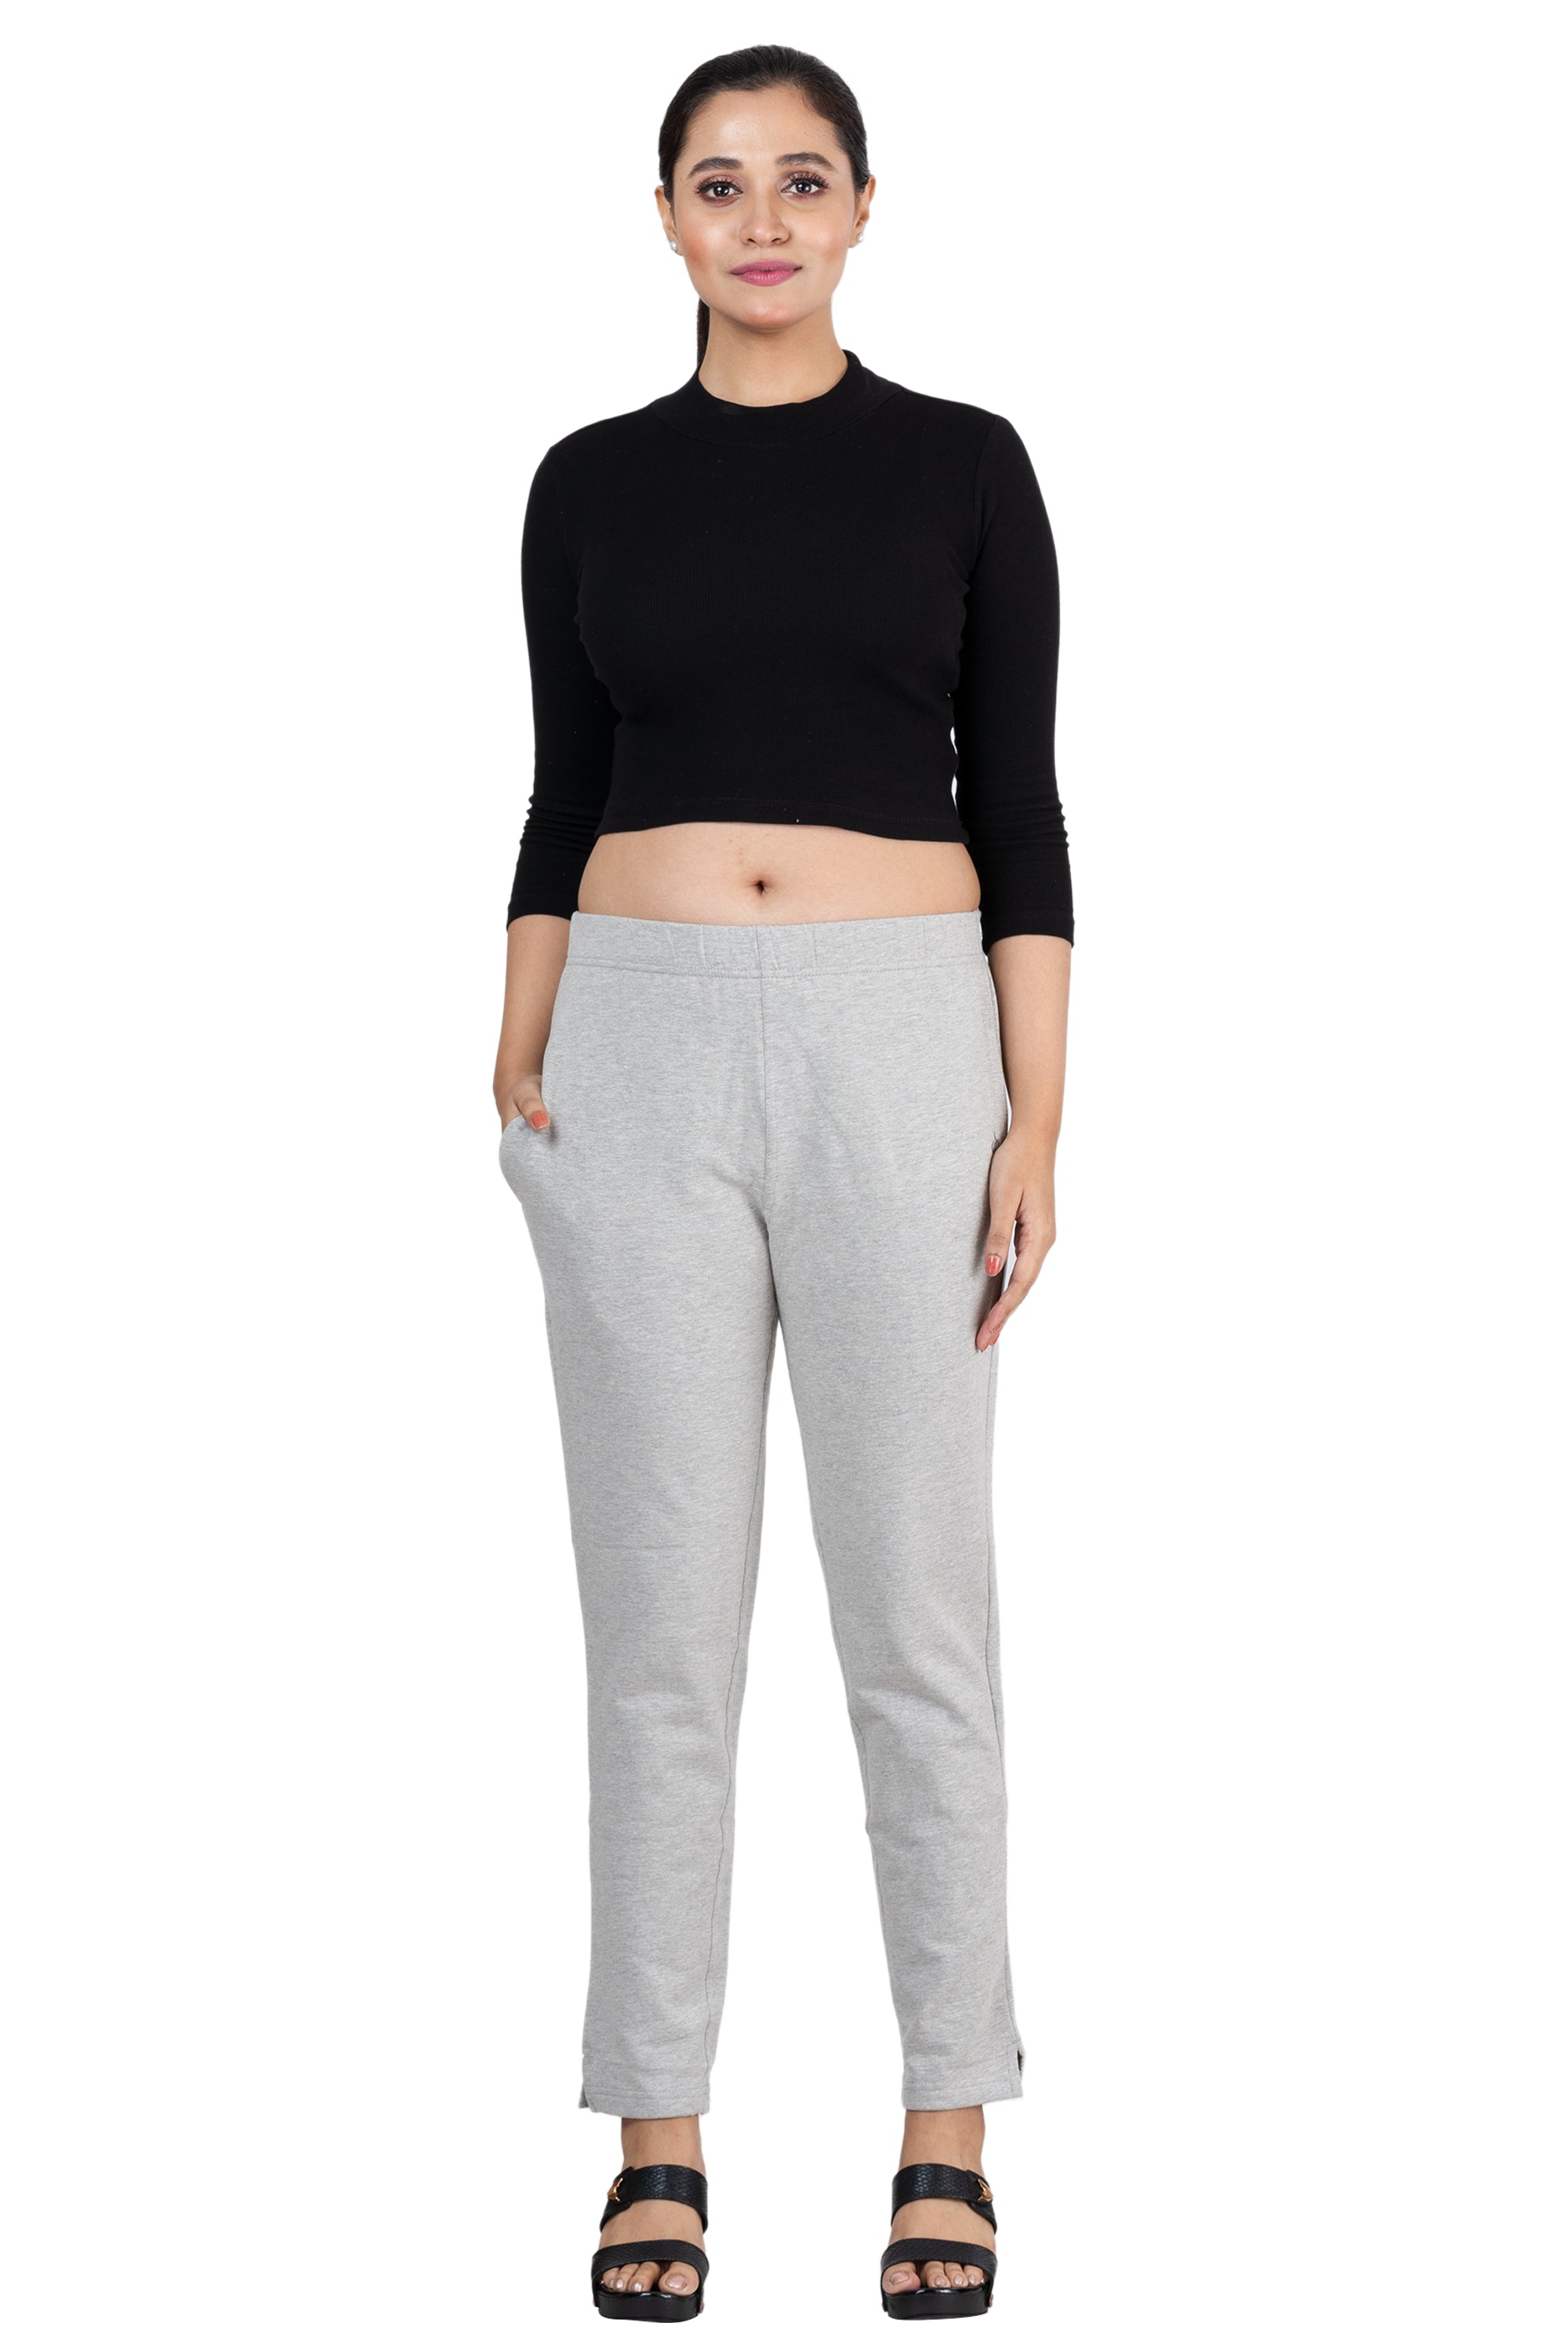 Elleven Trousers and Pants  Buy Elleven Blue Straight Winter Trousers  Online  Nykaa Fashion